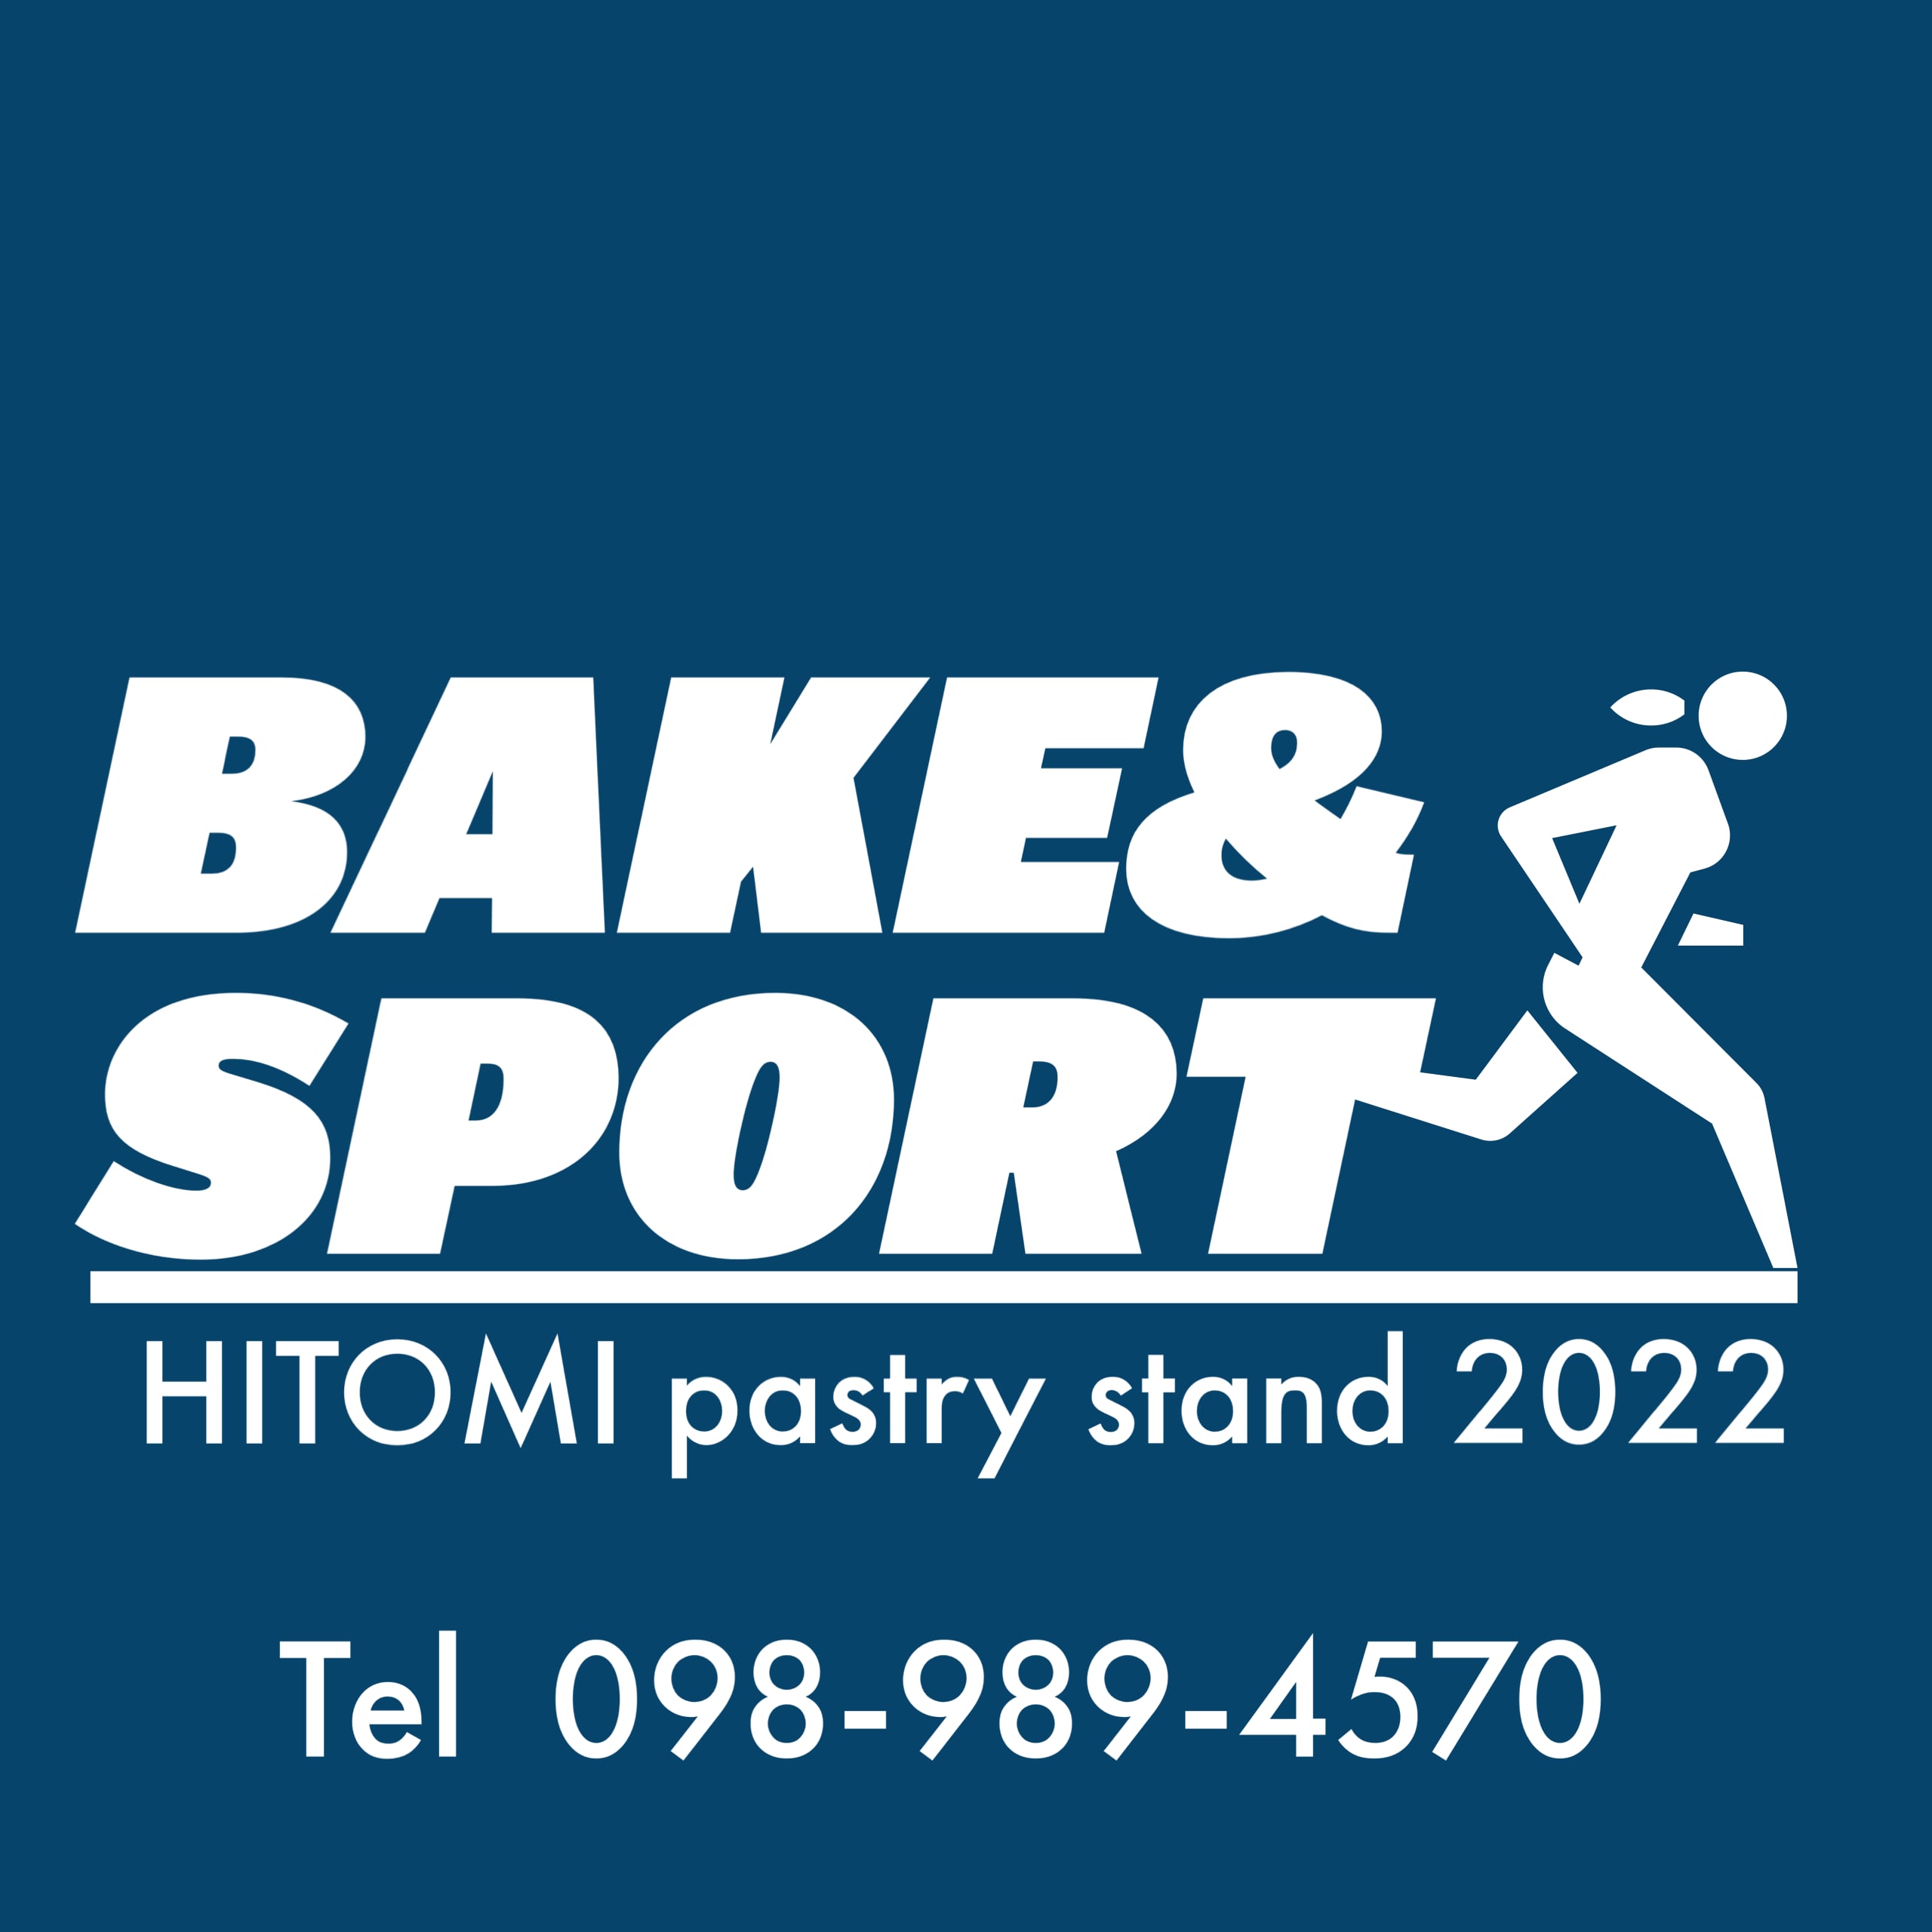 Bake and sport